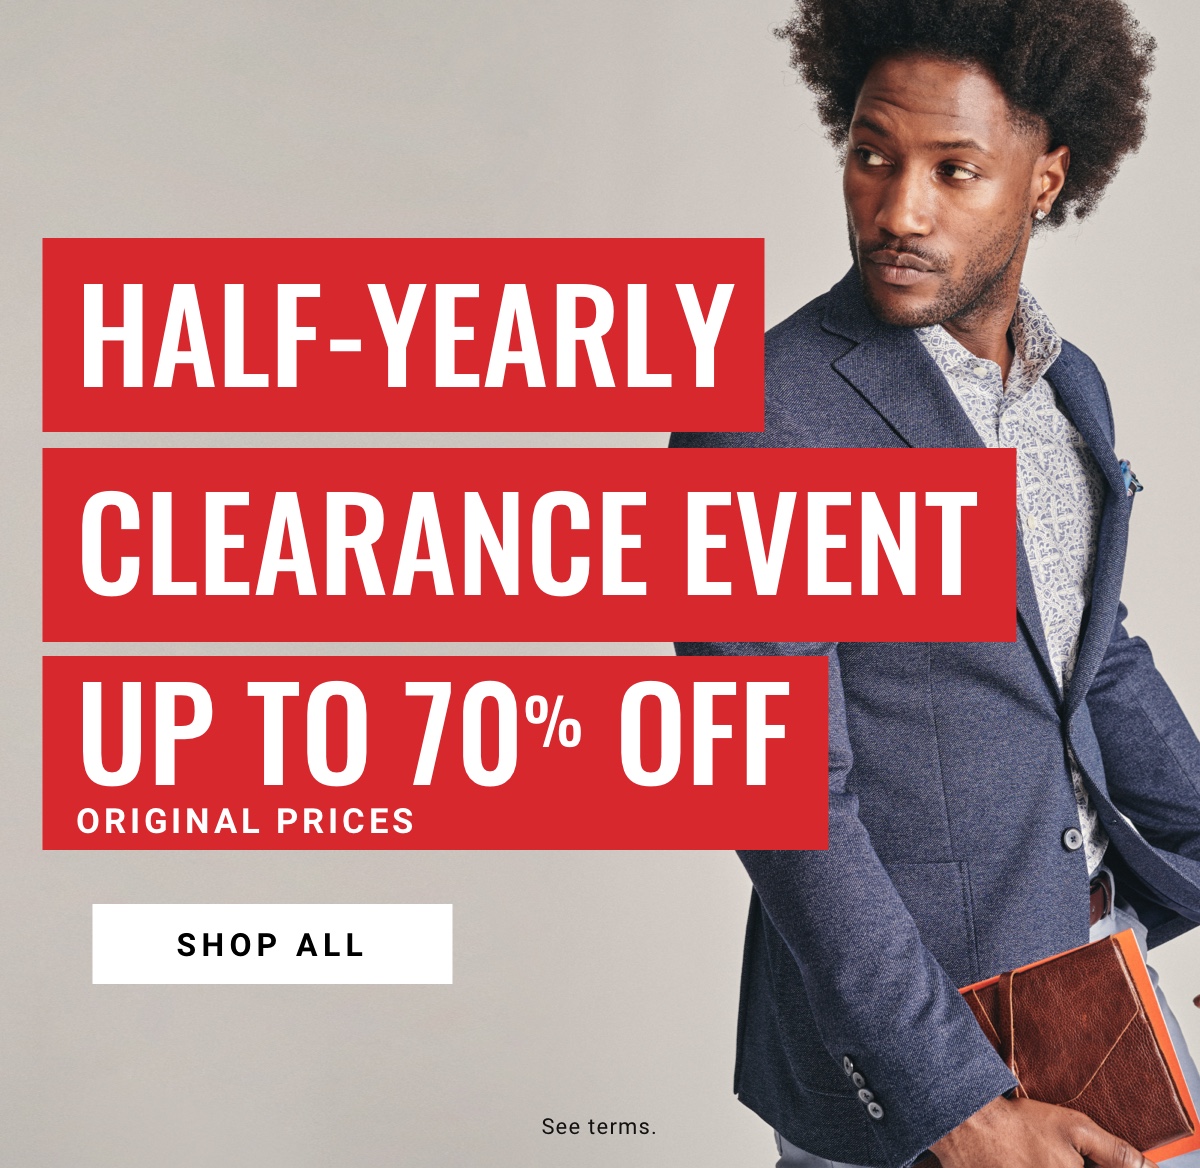 Half-Yearly Clearance Event|Up to 70% Off|Original Prices|Shop All